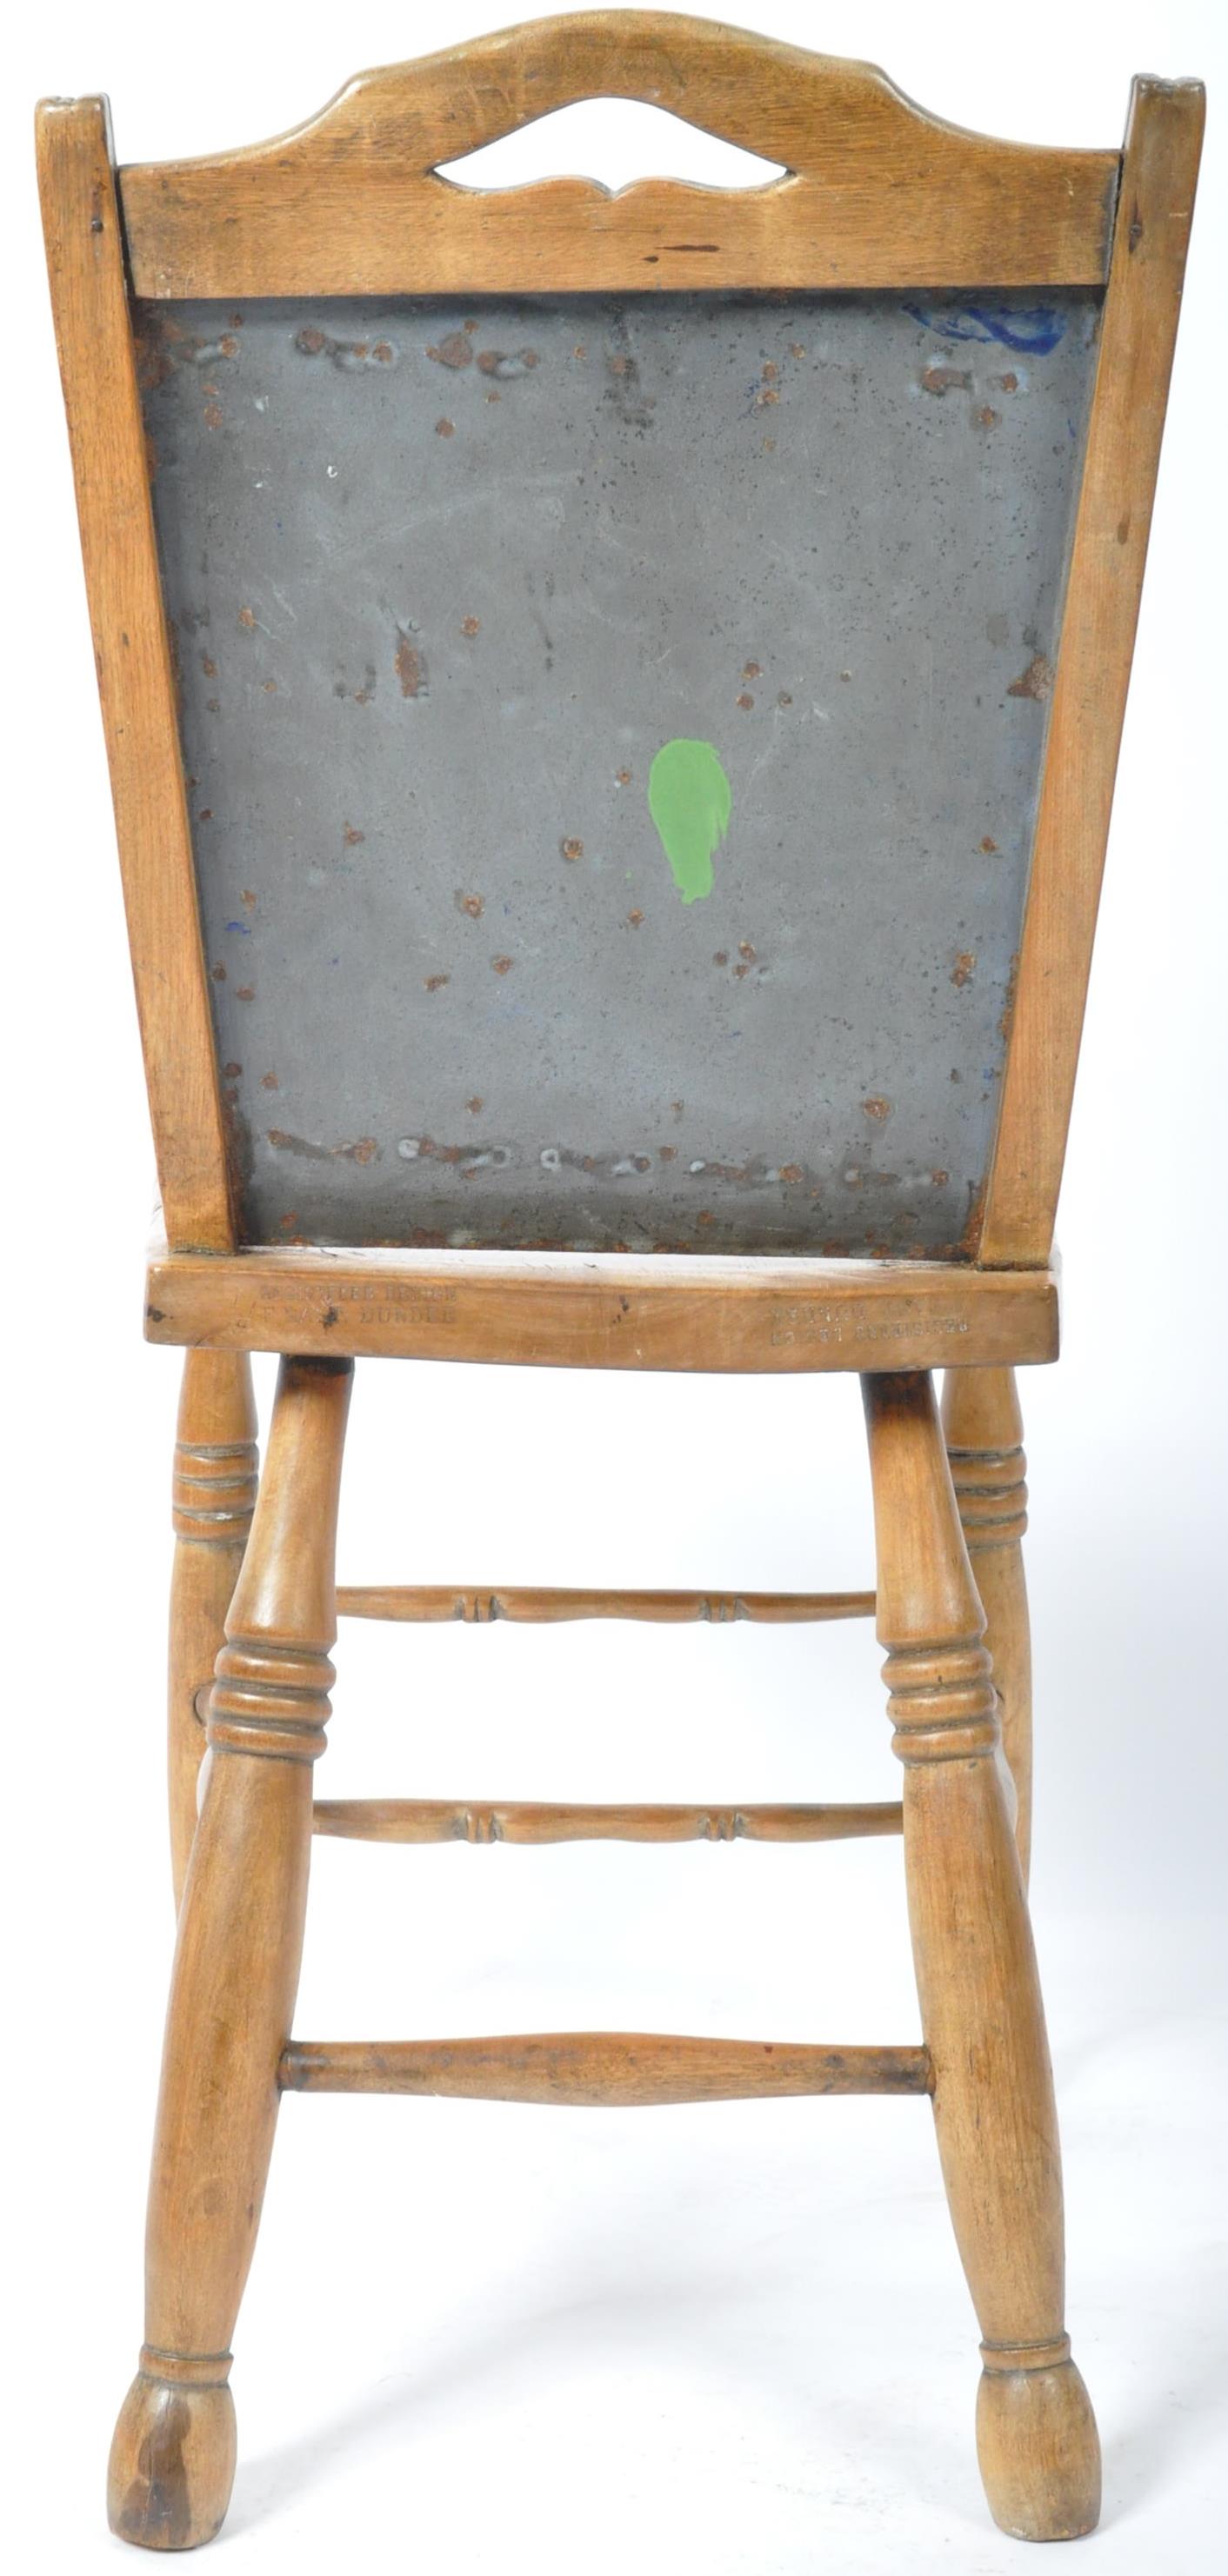 WATSON'S SOAP ANTIQUE ADVERTISING ENAMEL BACKED CHAIR - Image 5 of 7